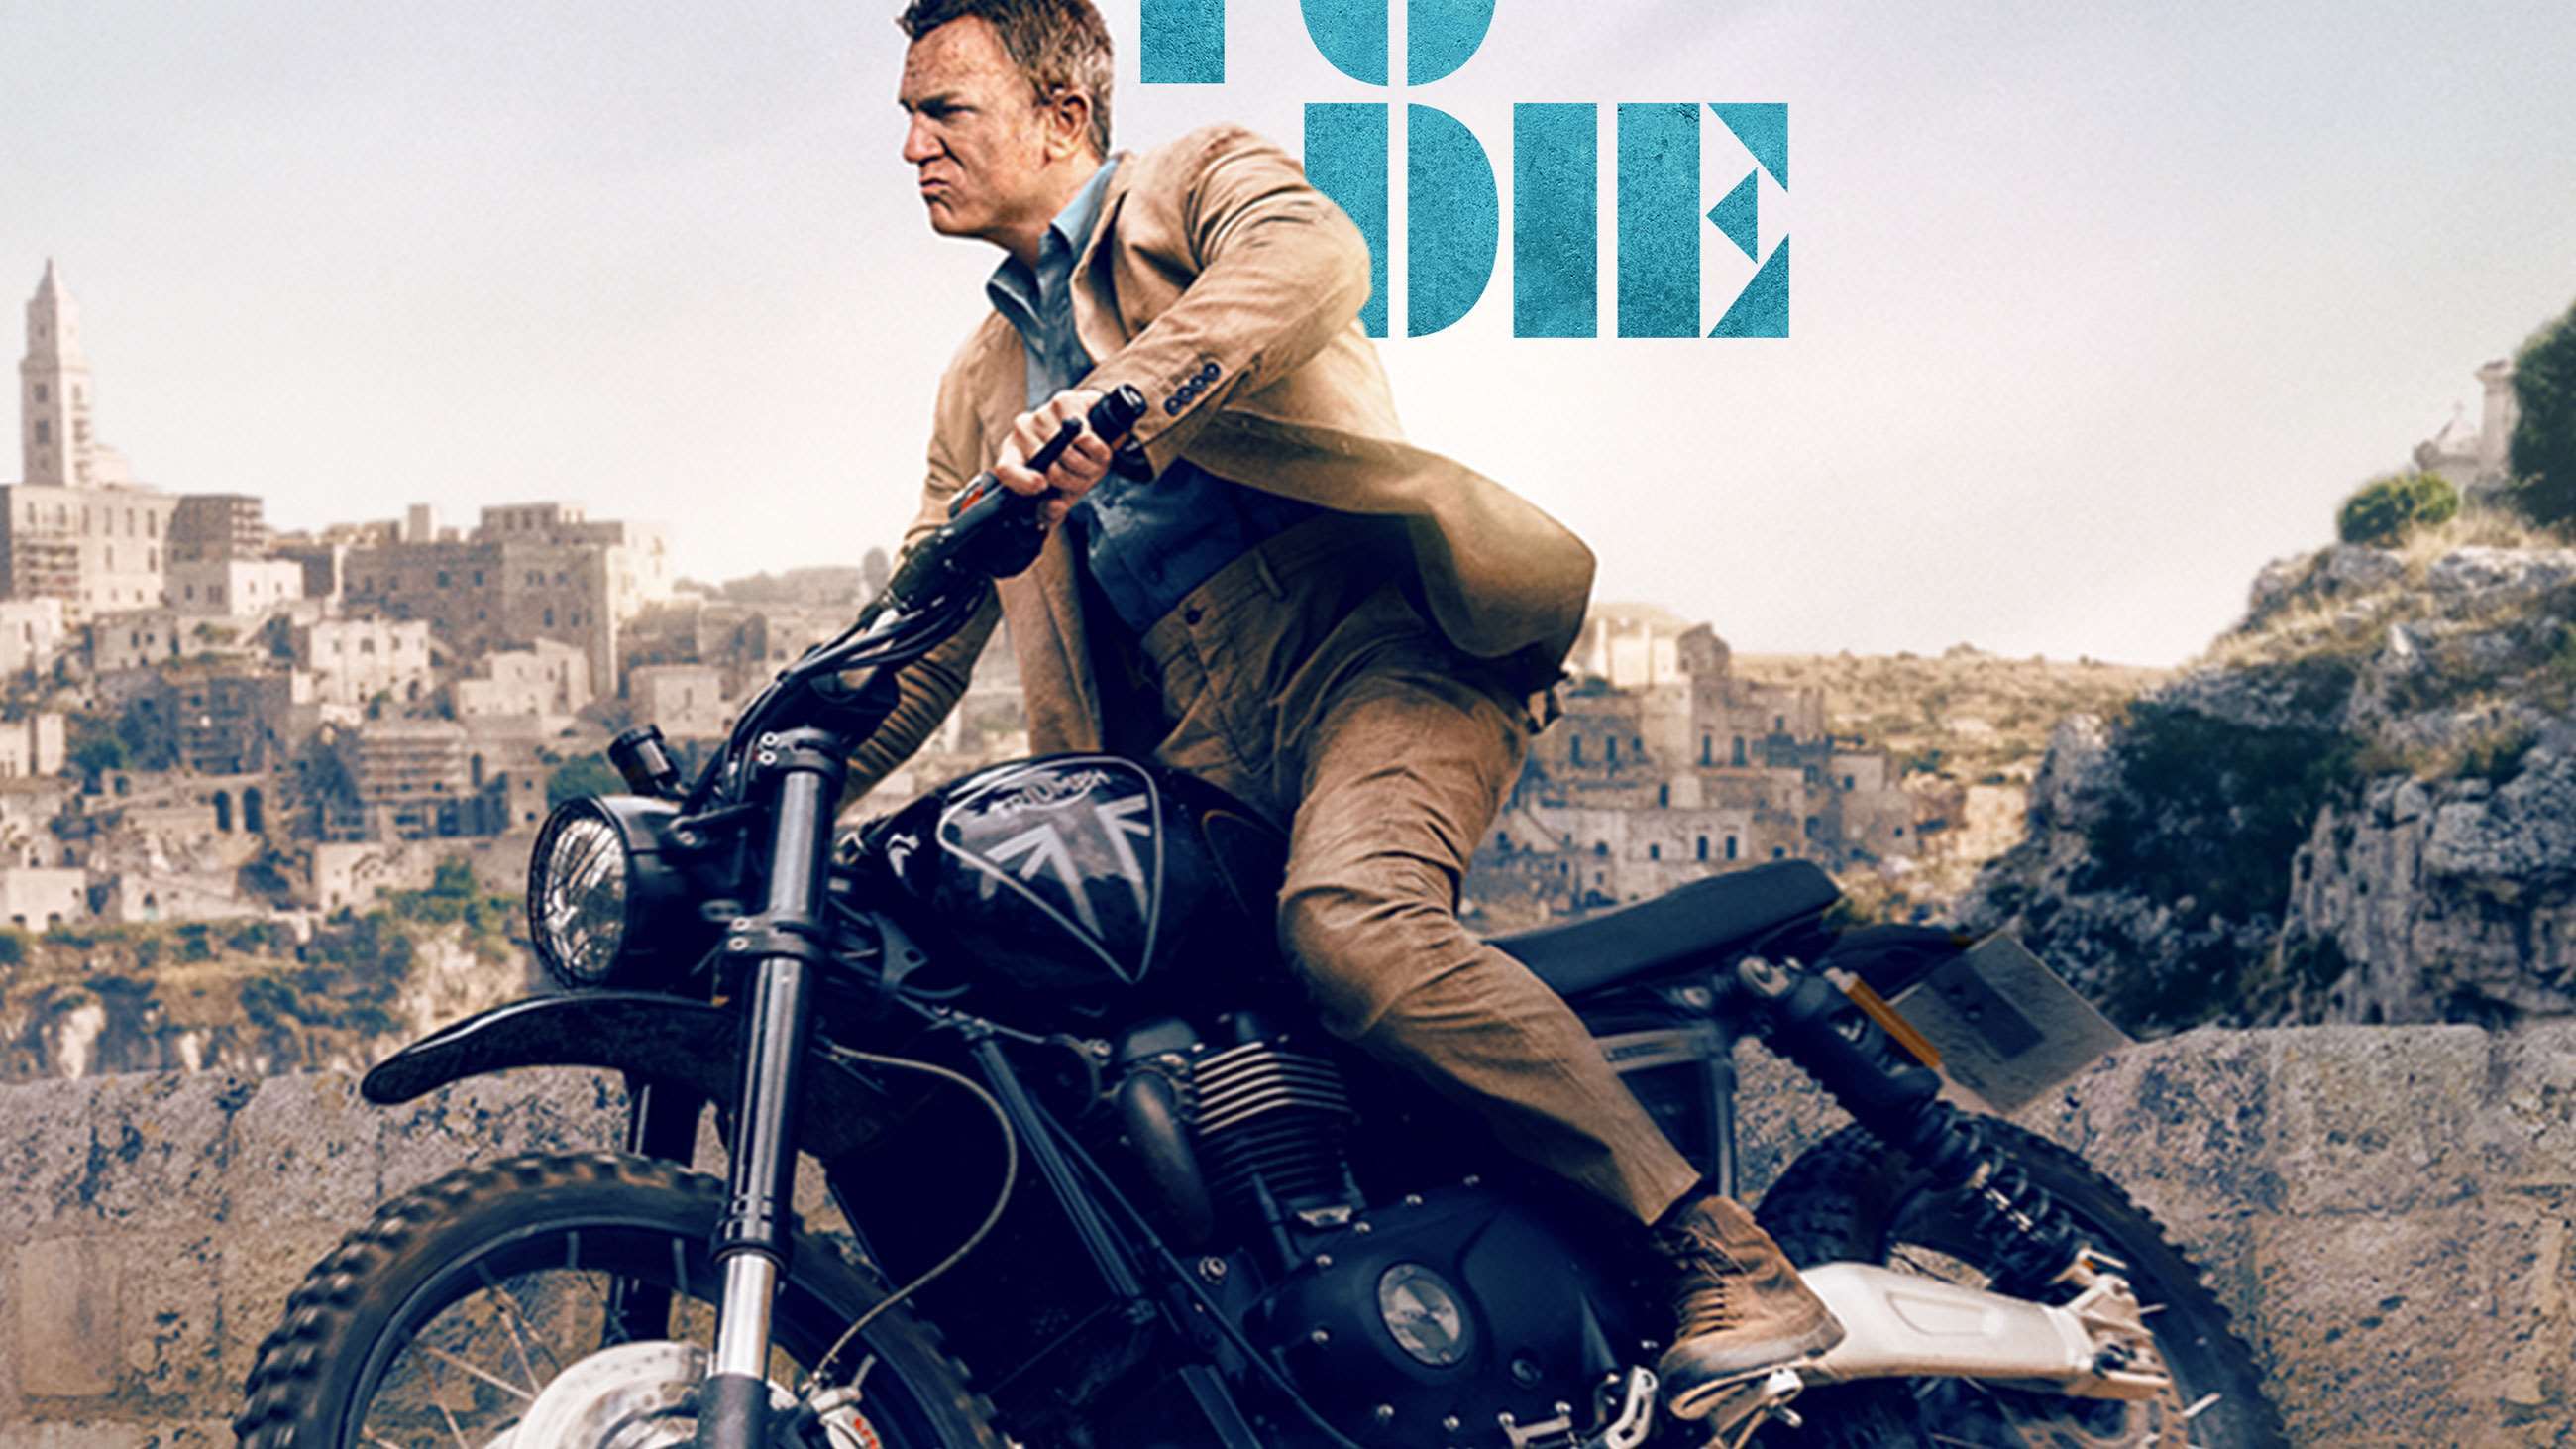 no-time-to-die-imax-poster-triumph-26022020.jpg